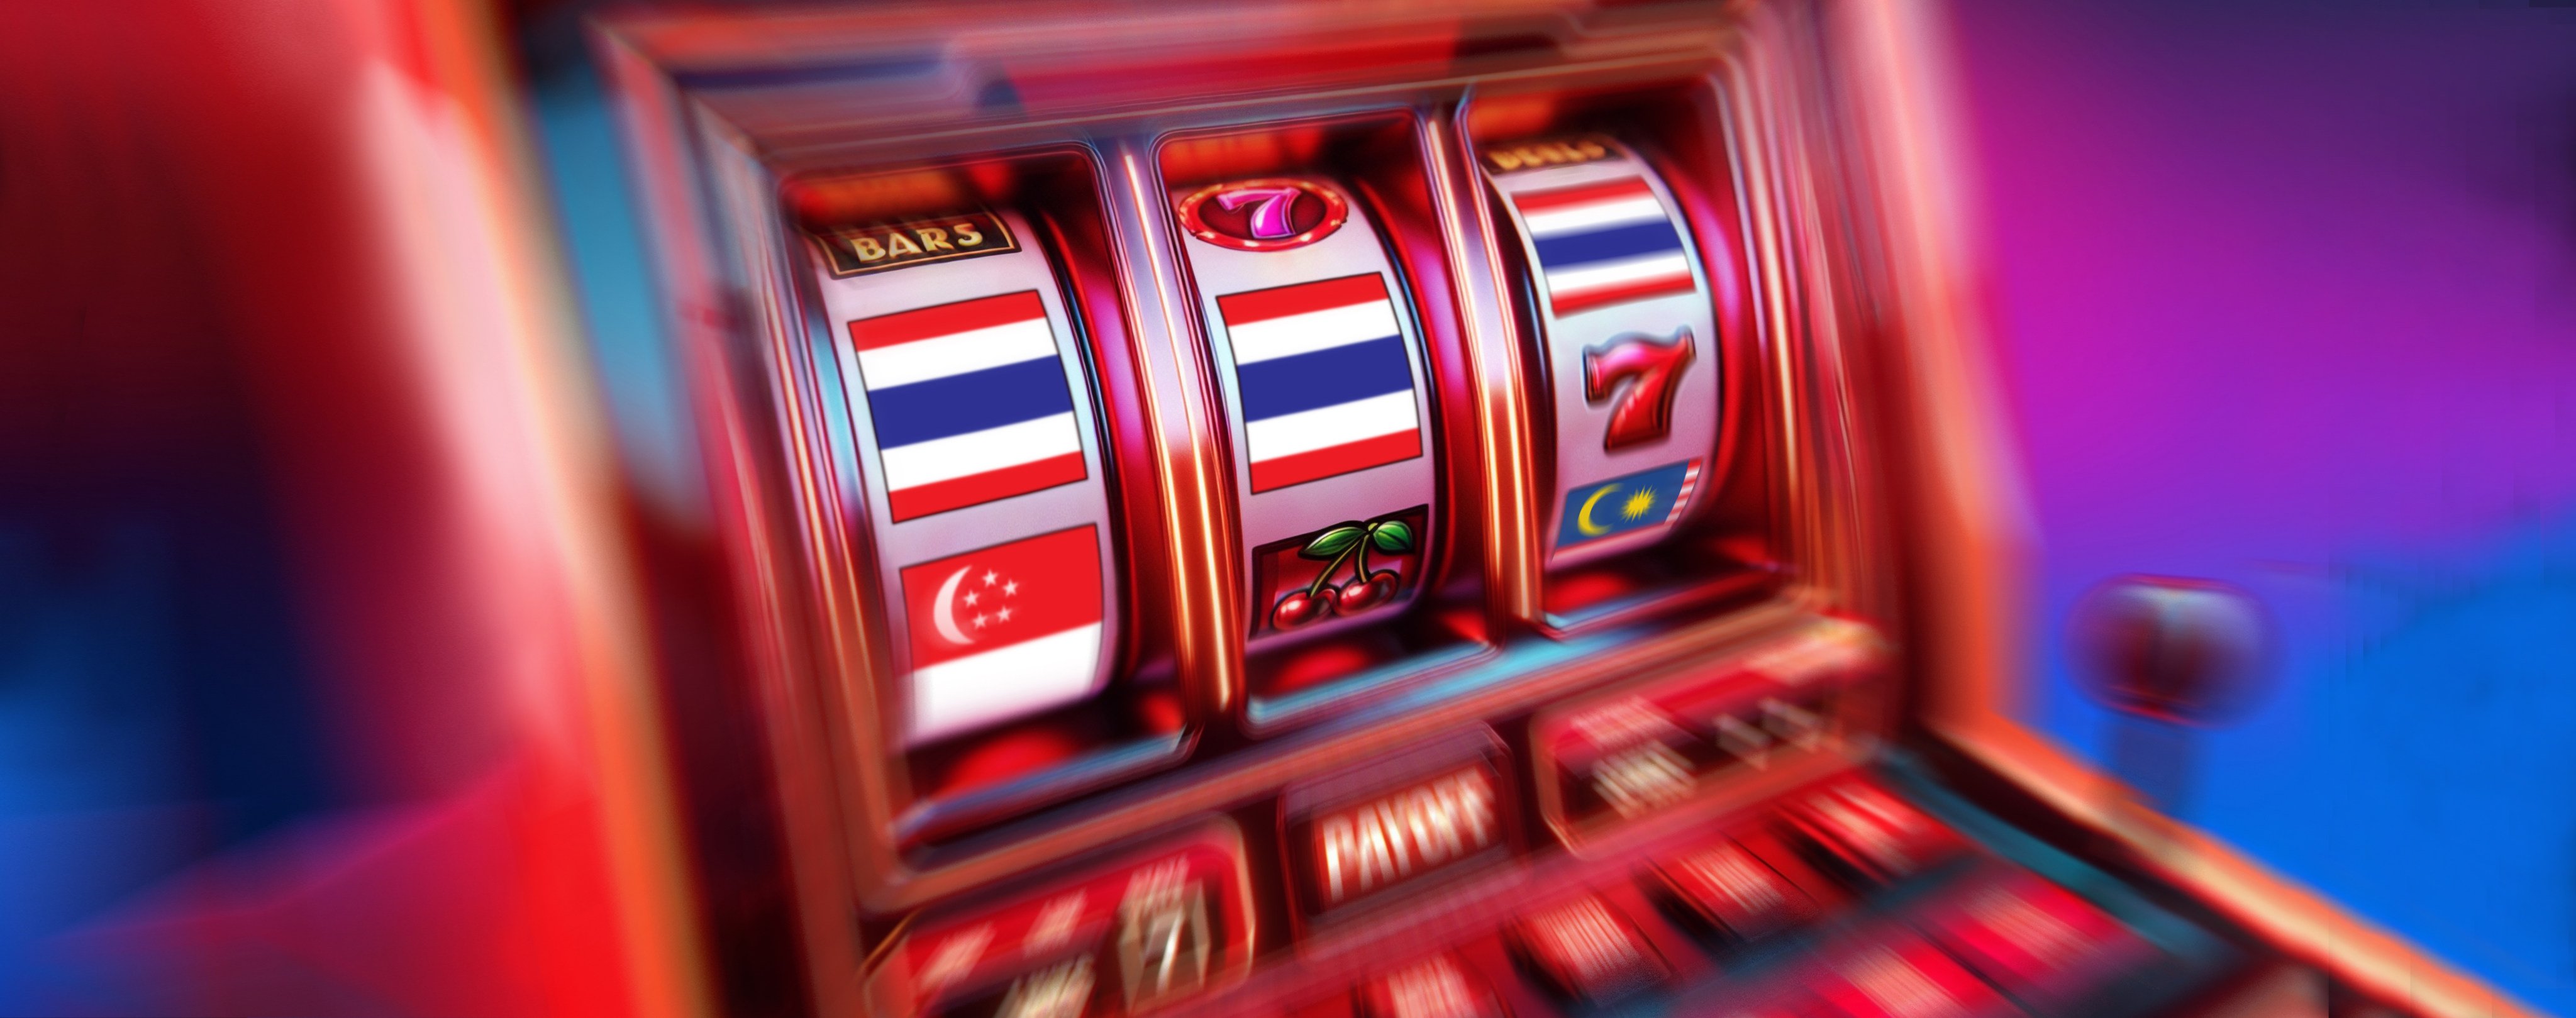 Industry insiders speculate a legalised gaming sector could rake in as much as US$5 billion a year for Thailand by the end of the decade. Image: Shutterstock/Kevin Wong